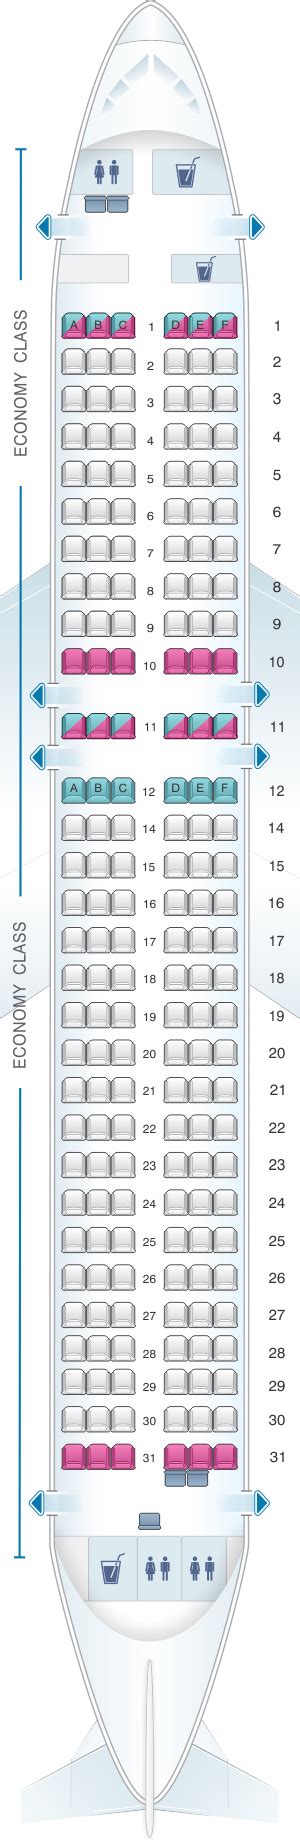 Vueling Seating Chart A Visual Reference Of Charts Chart Master